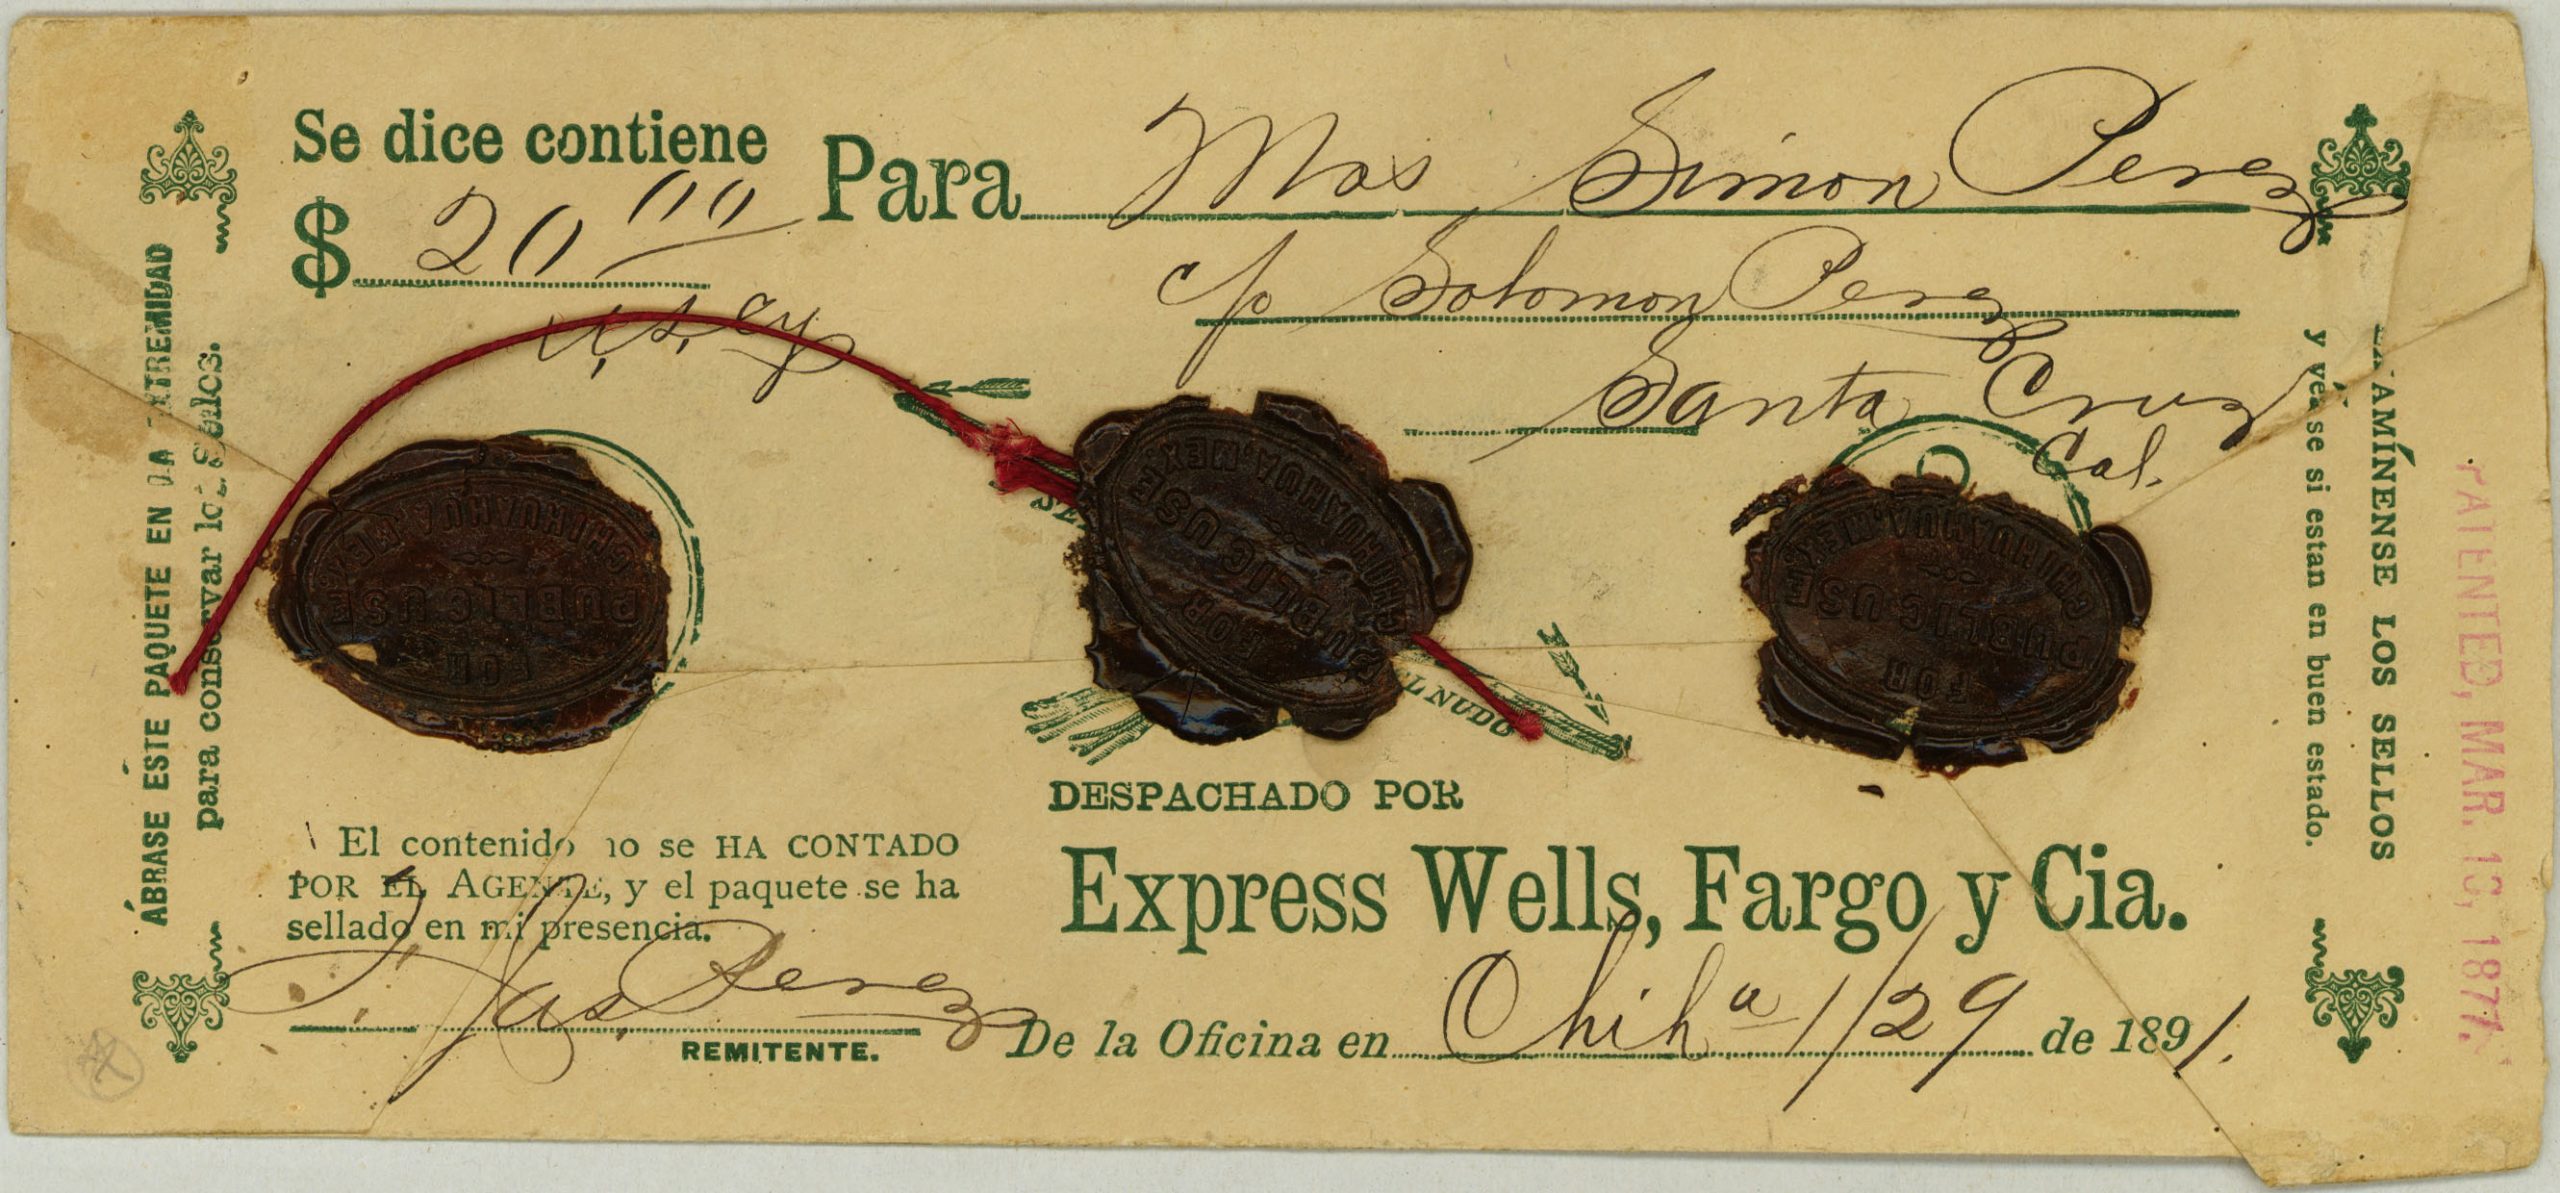 An aged envelope has worn writing with the amount of $20. It also shows Express Wells Fargo y Cia.